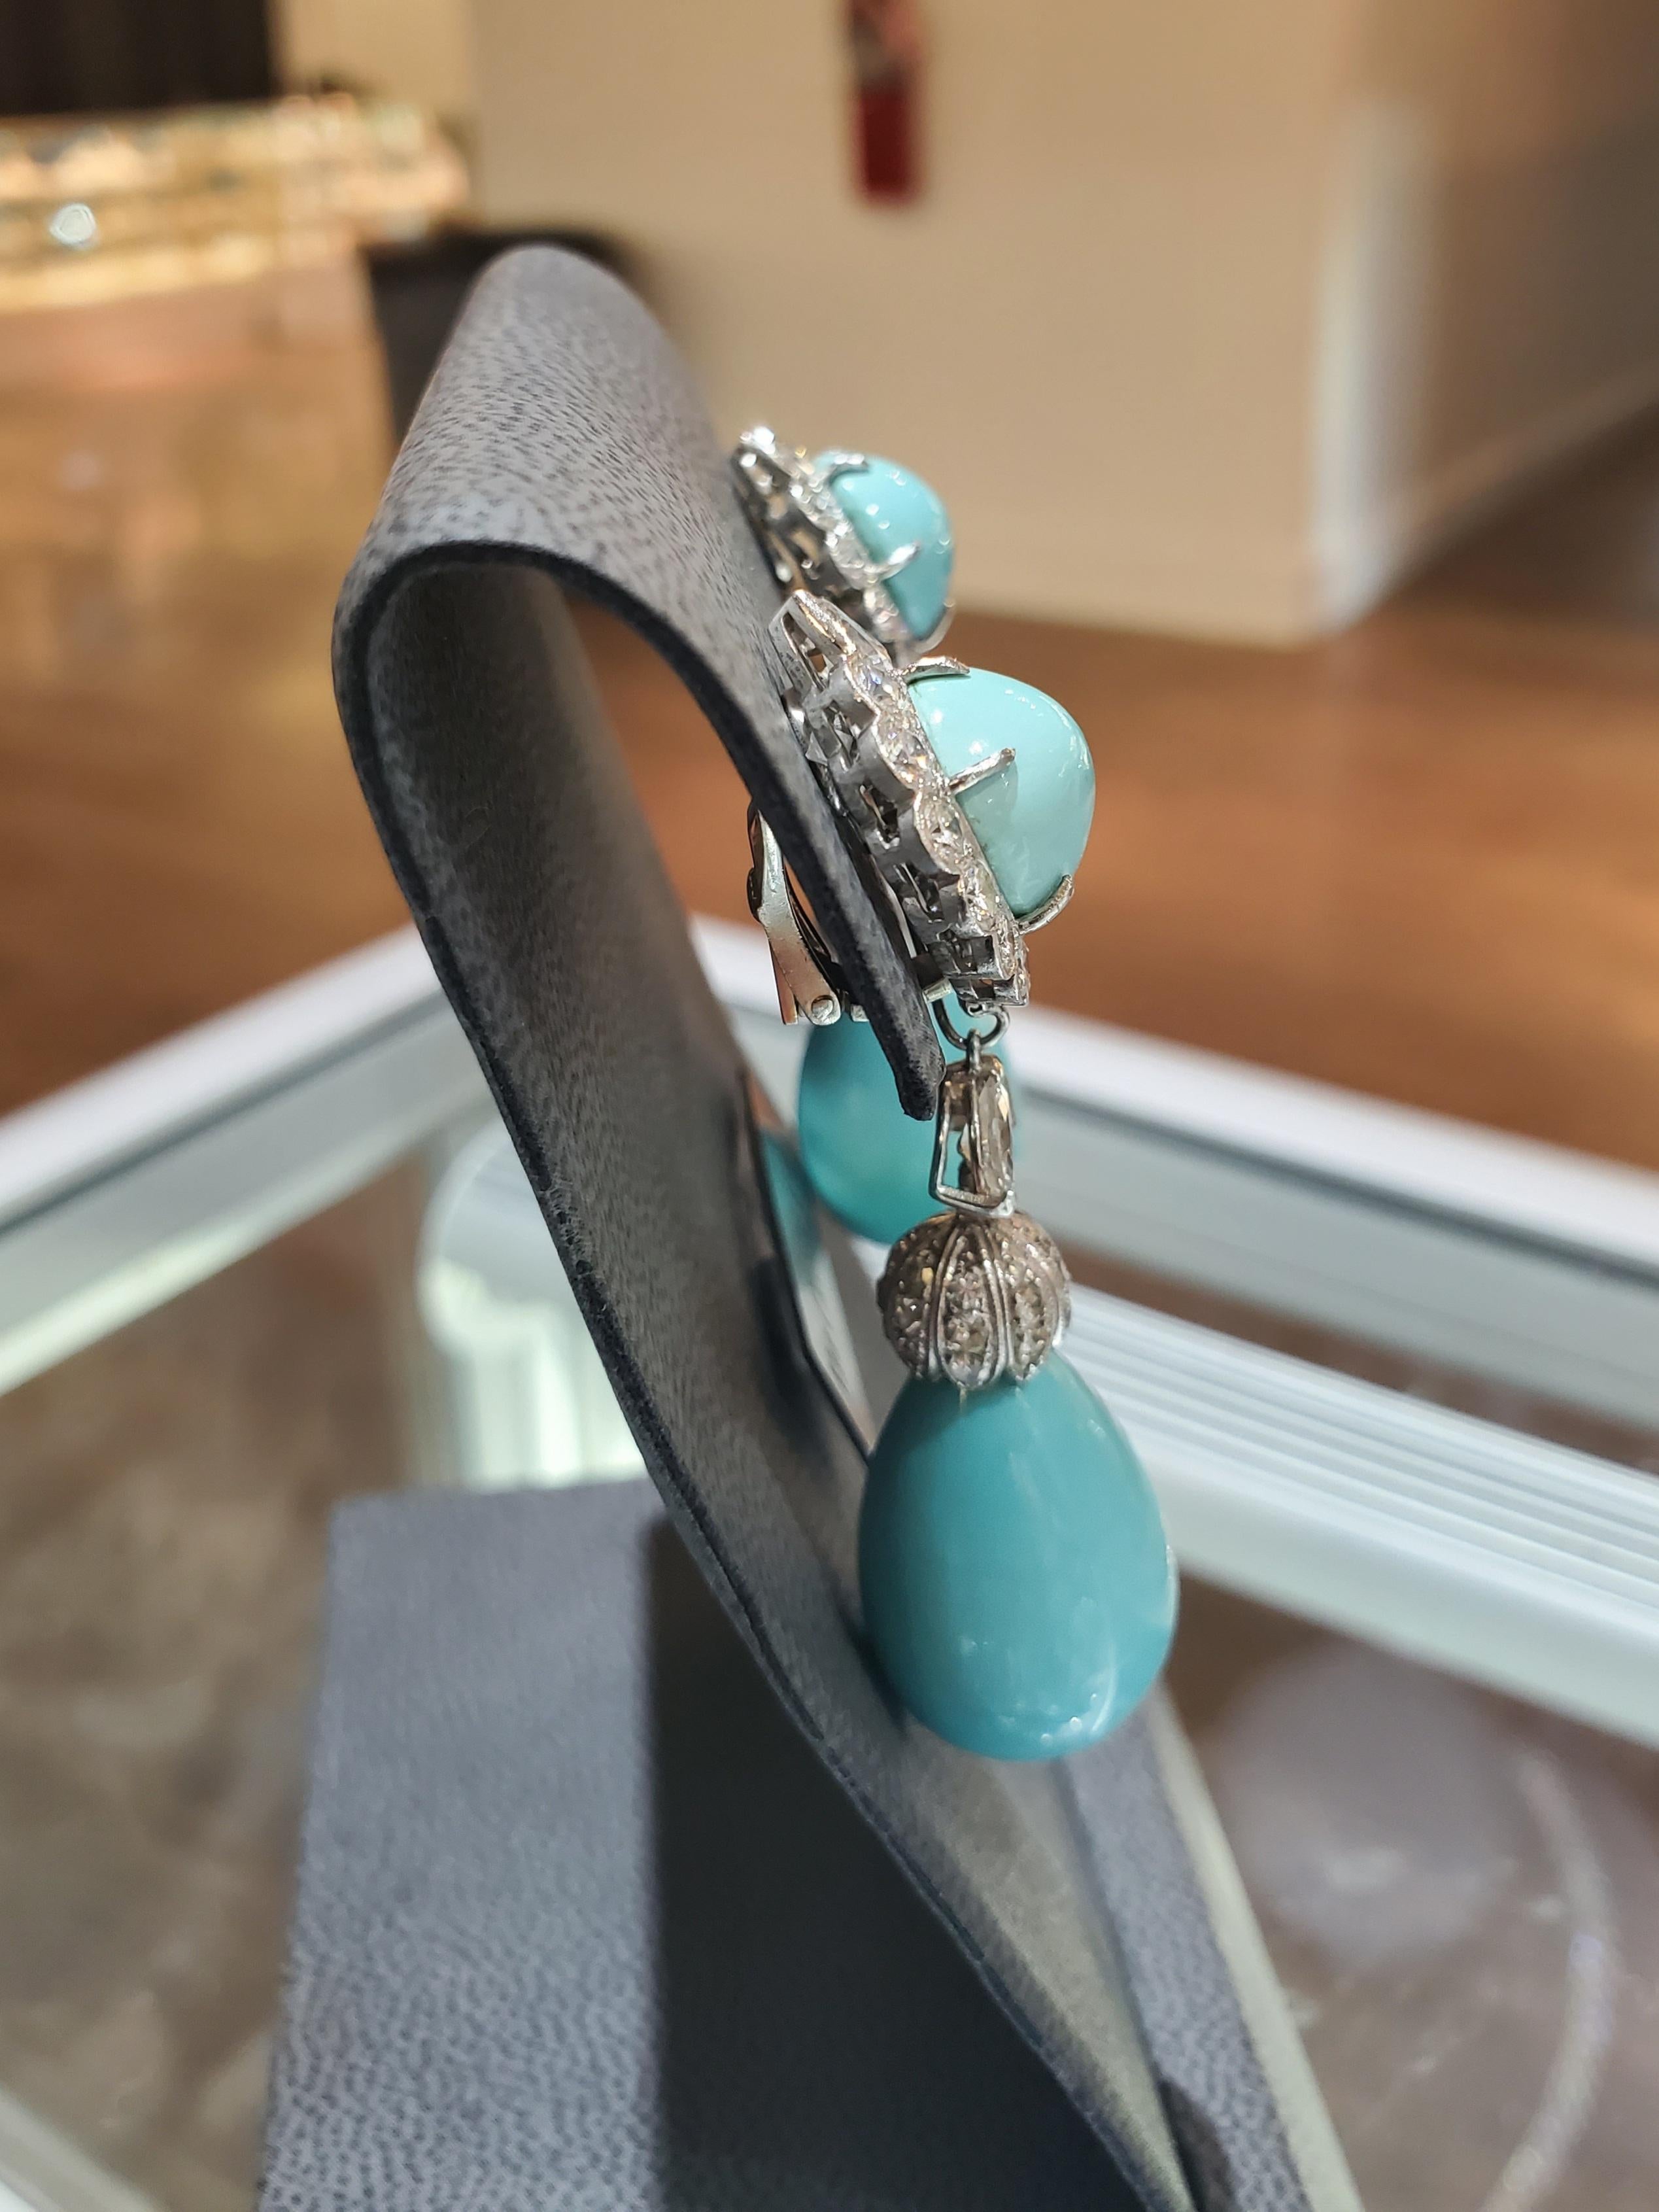 Cabochon Iconic Van Cleef & Arpels Turquoise & Diamond 'Day and Night' Earrings